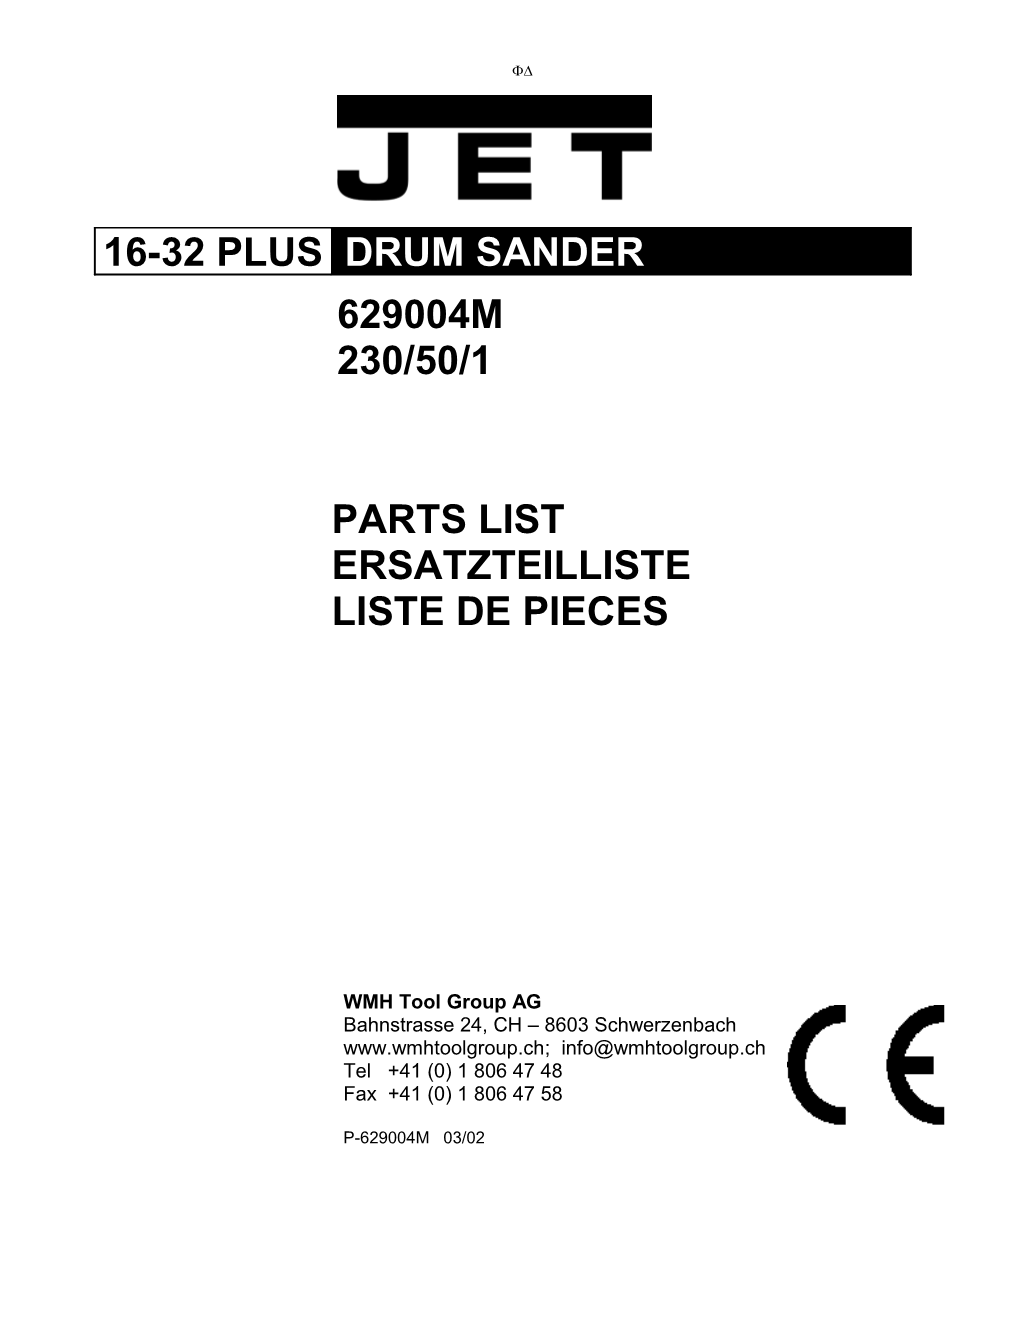 Parts List for The